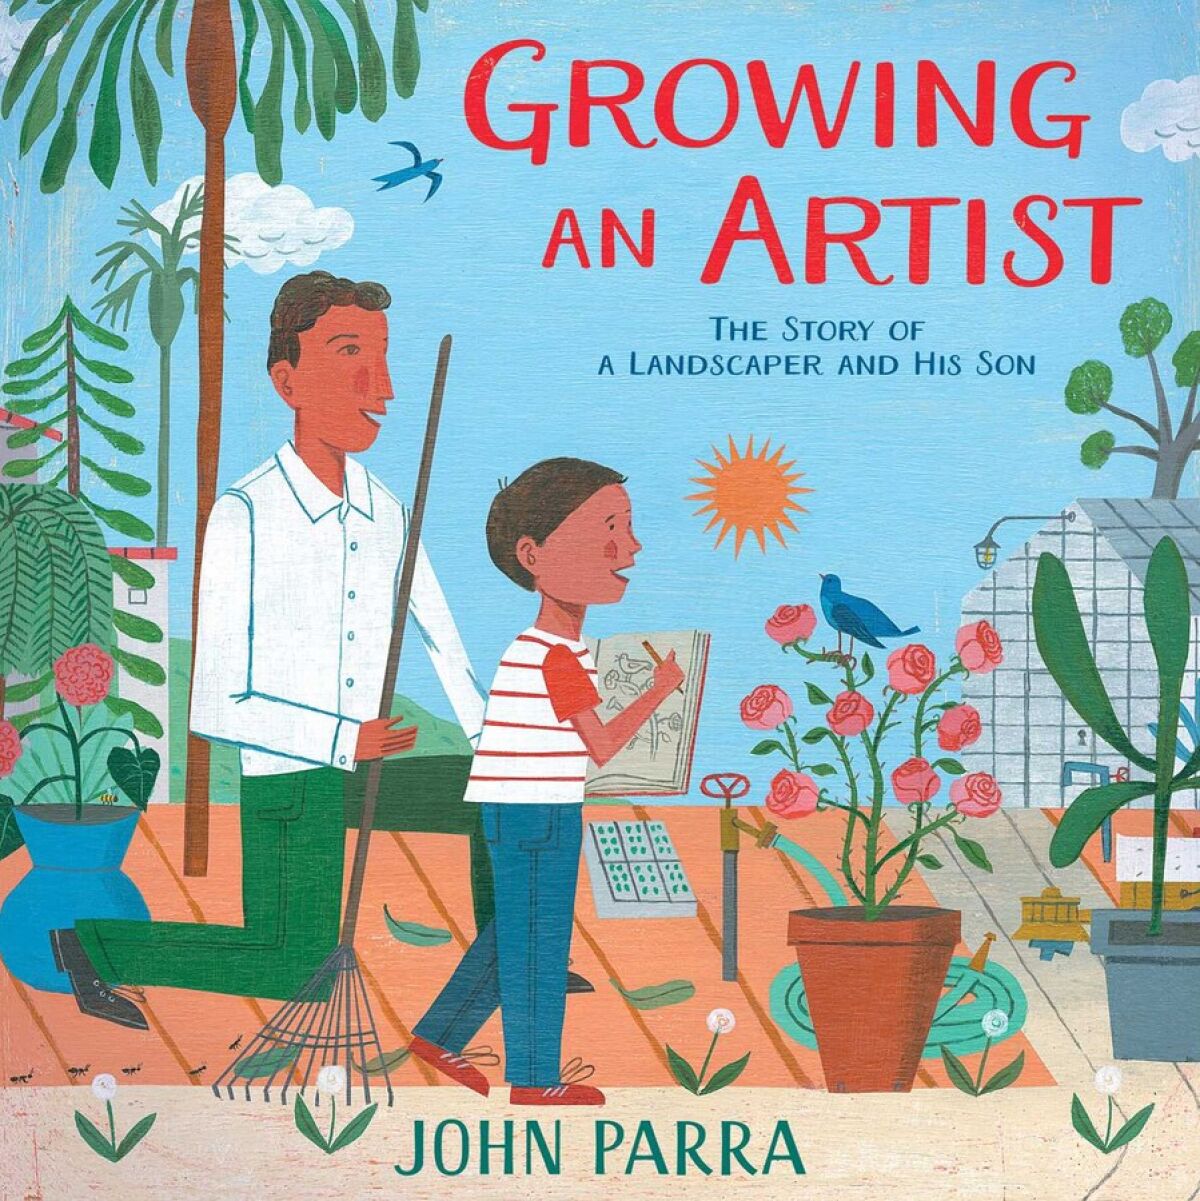 The cover of Parra's "Growing an Artist."